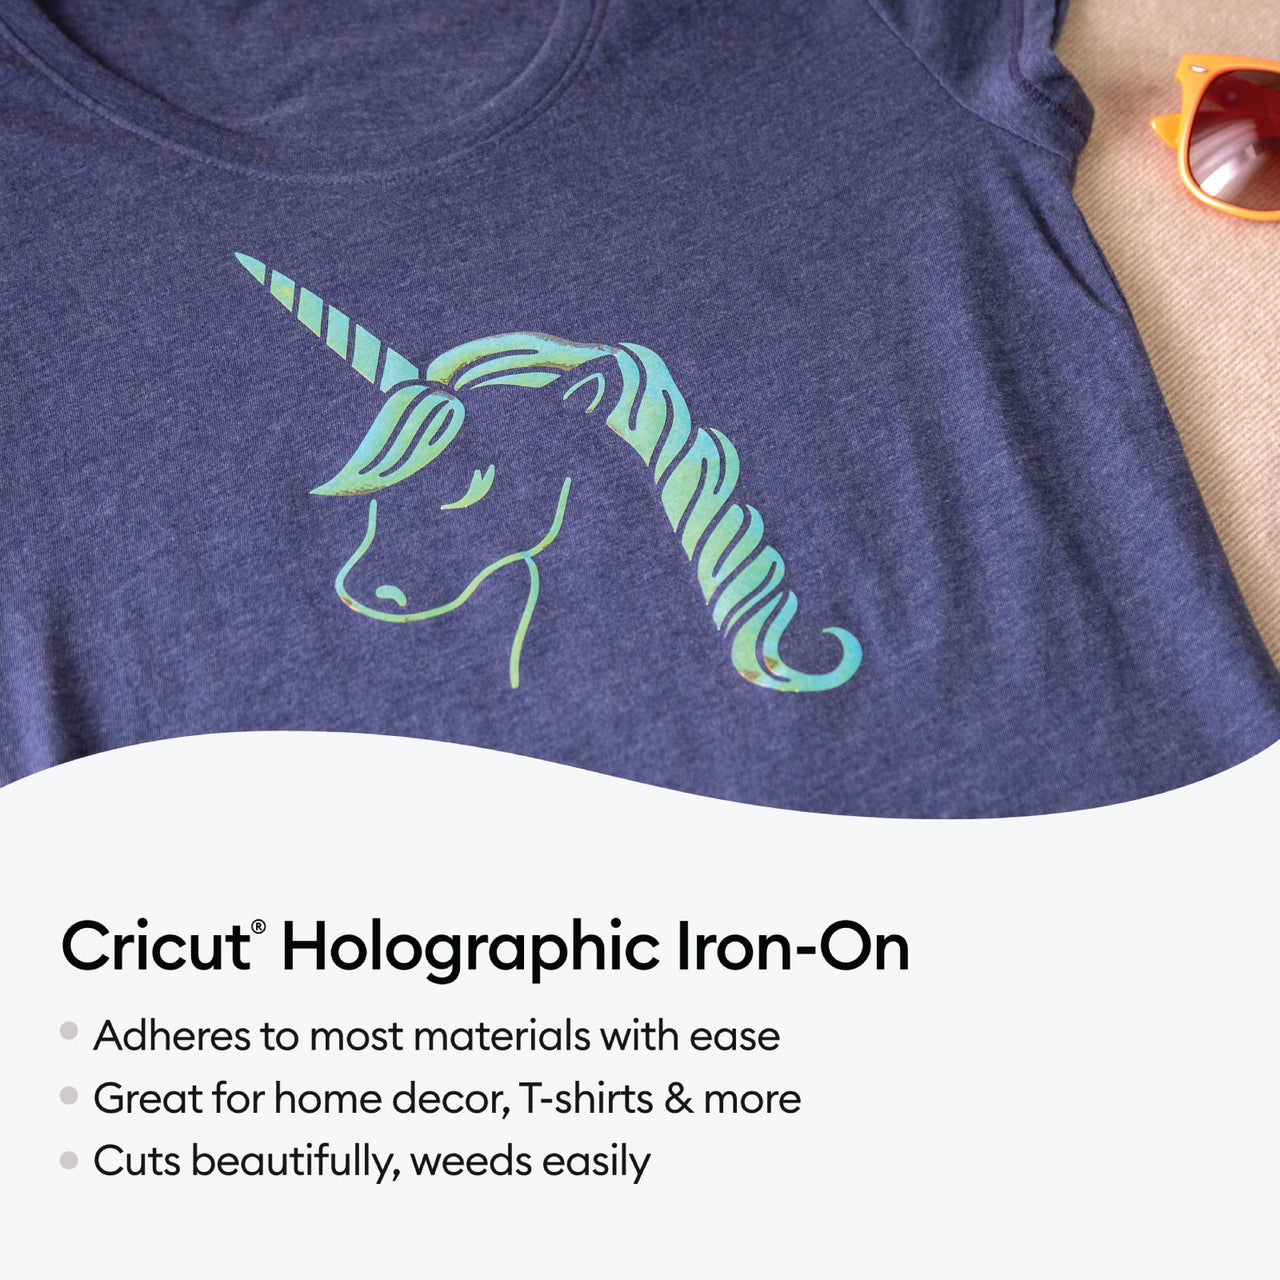 Cricut Holographic Iron-On Sampler, Ultimate 6 ct